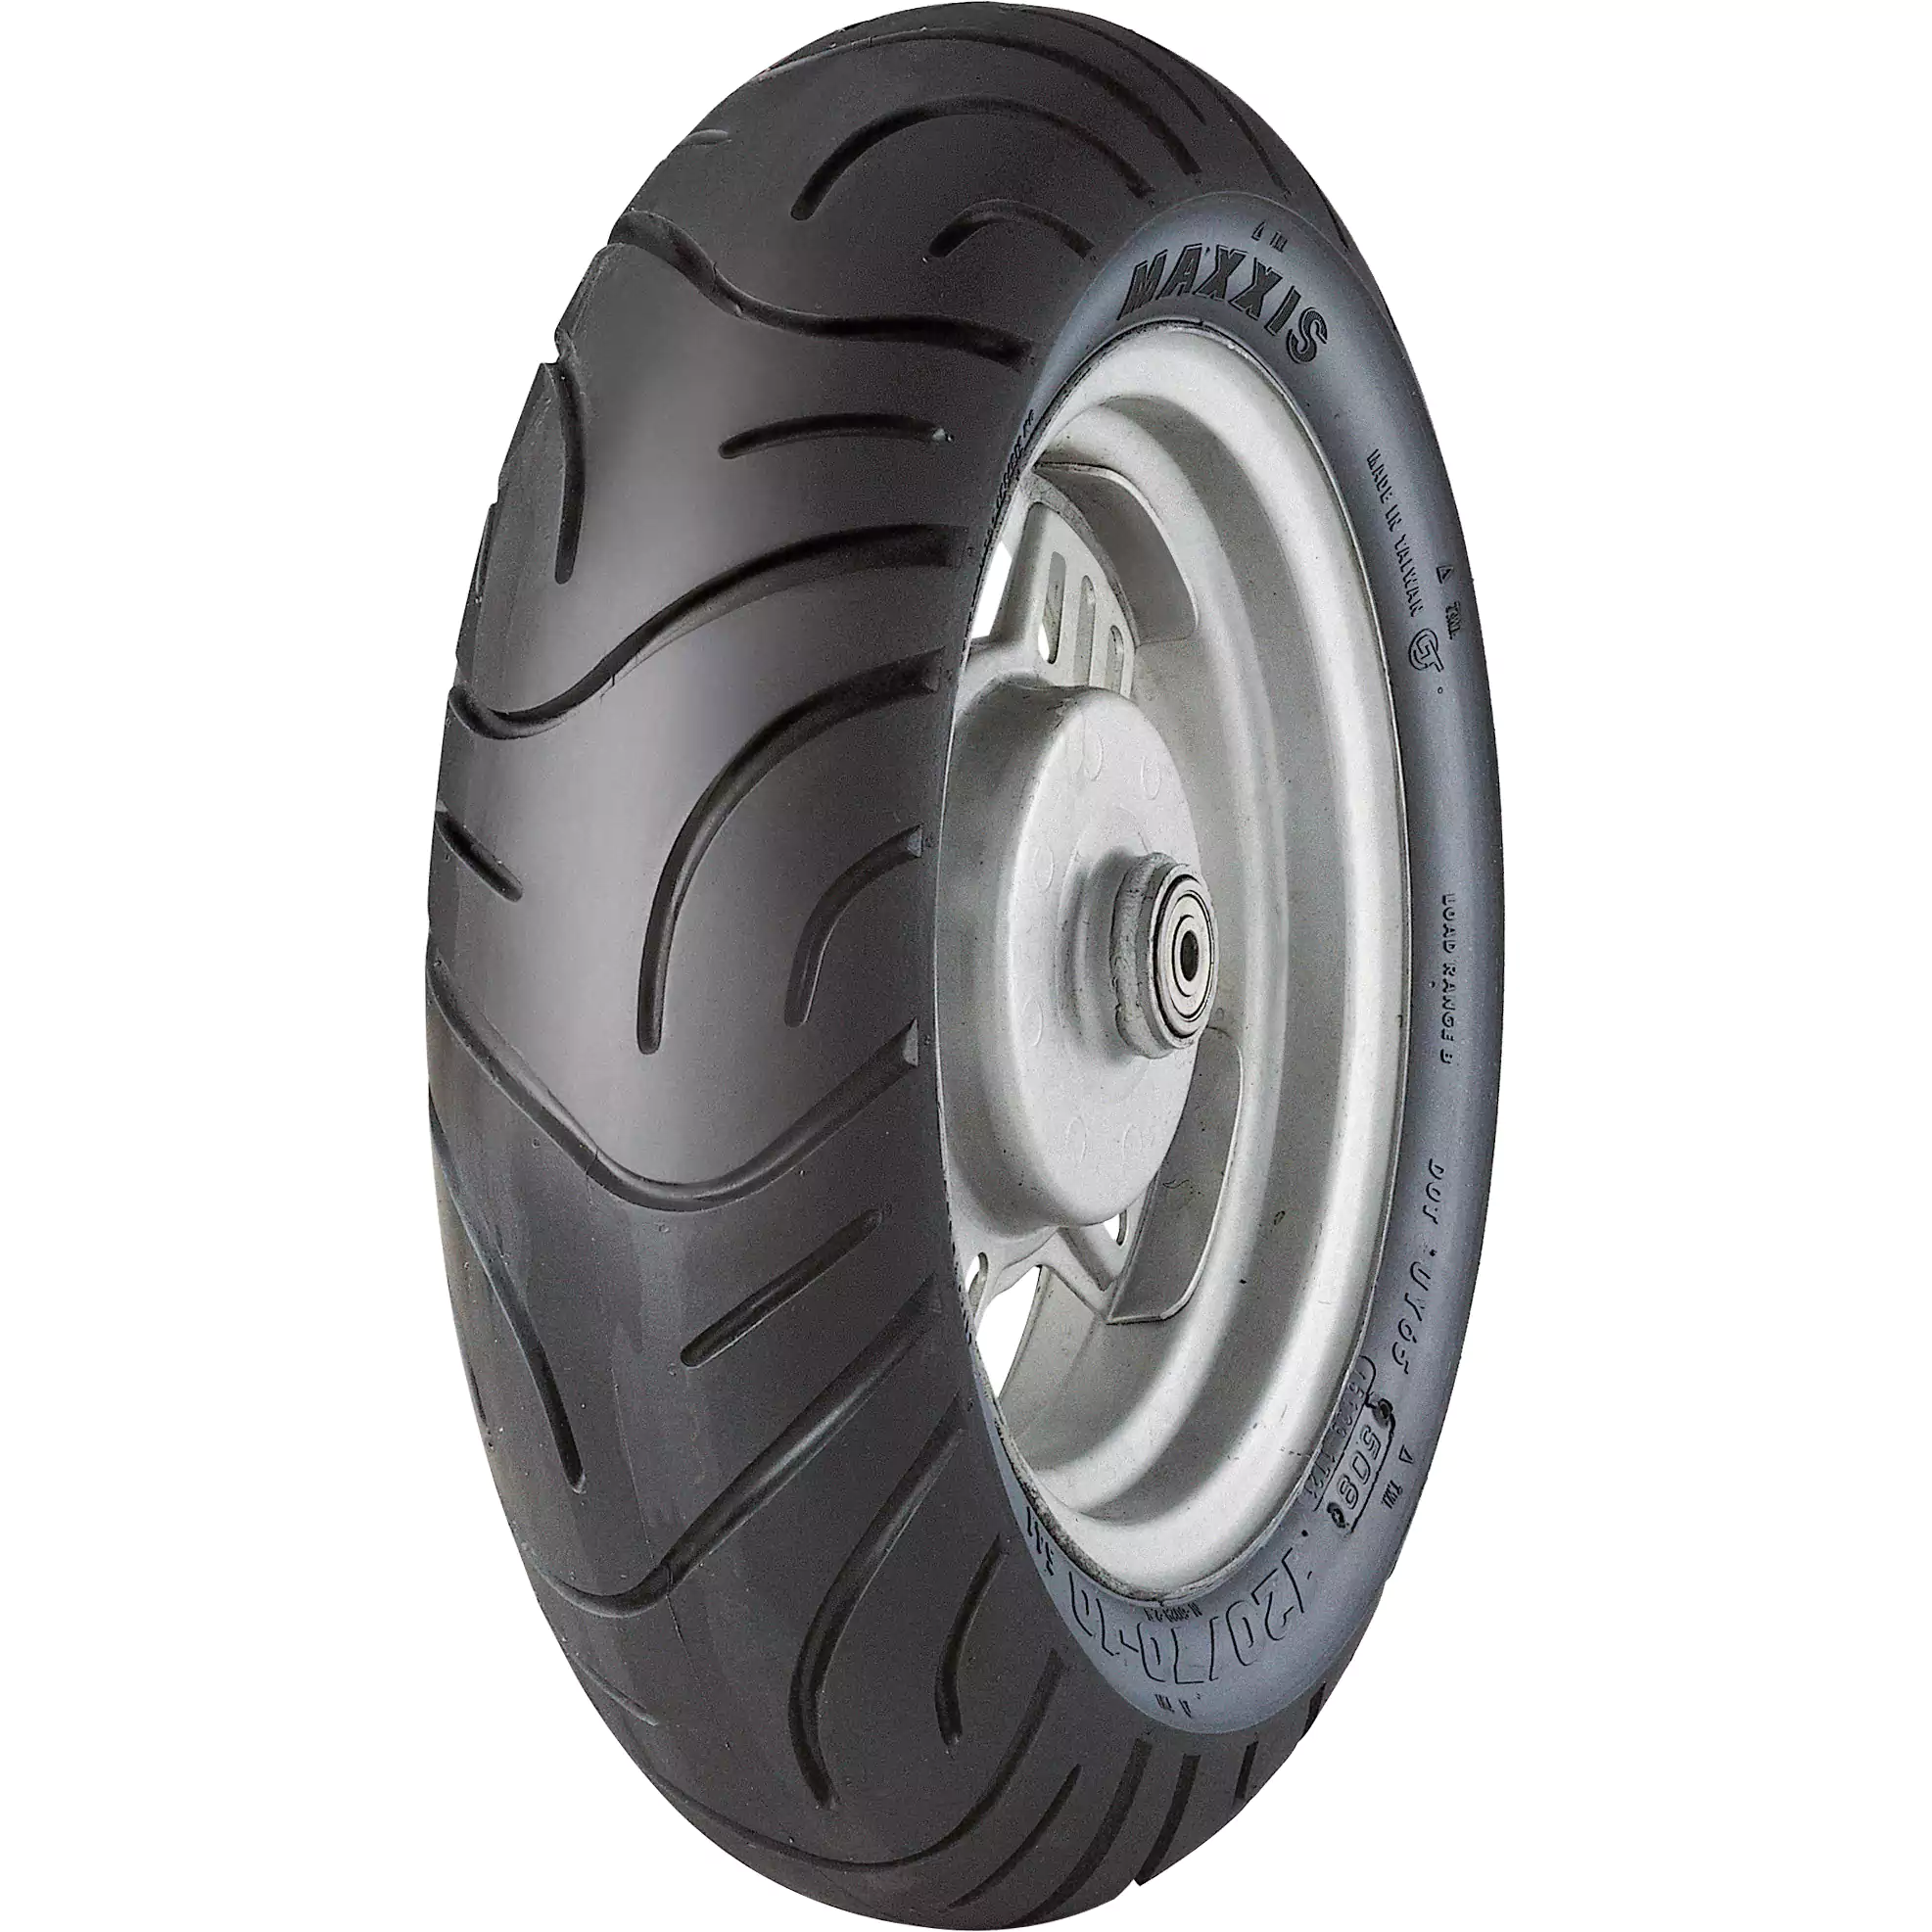 120/70-12" Maxxis M6029 51L Tubeless Scooter Tyre 